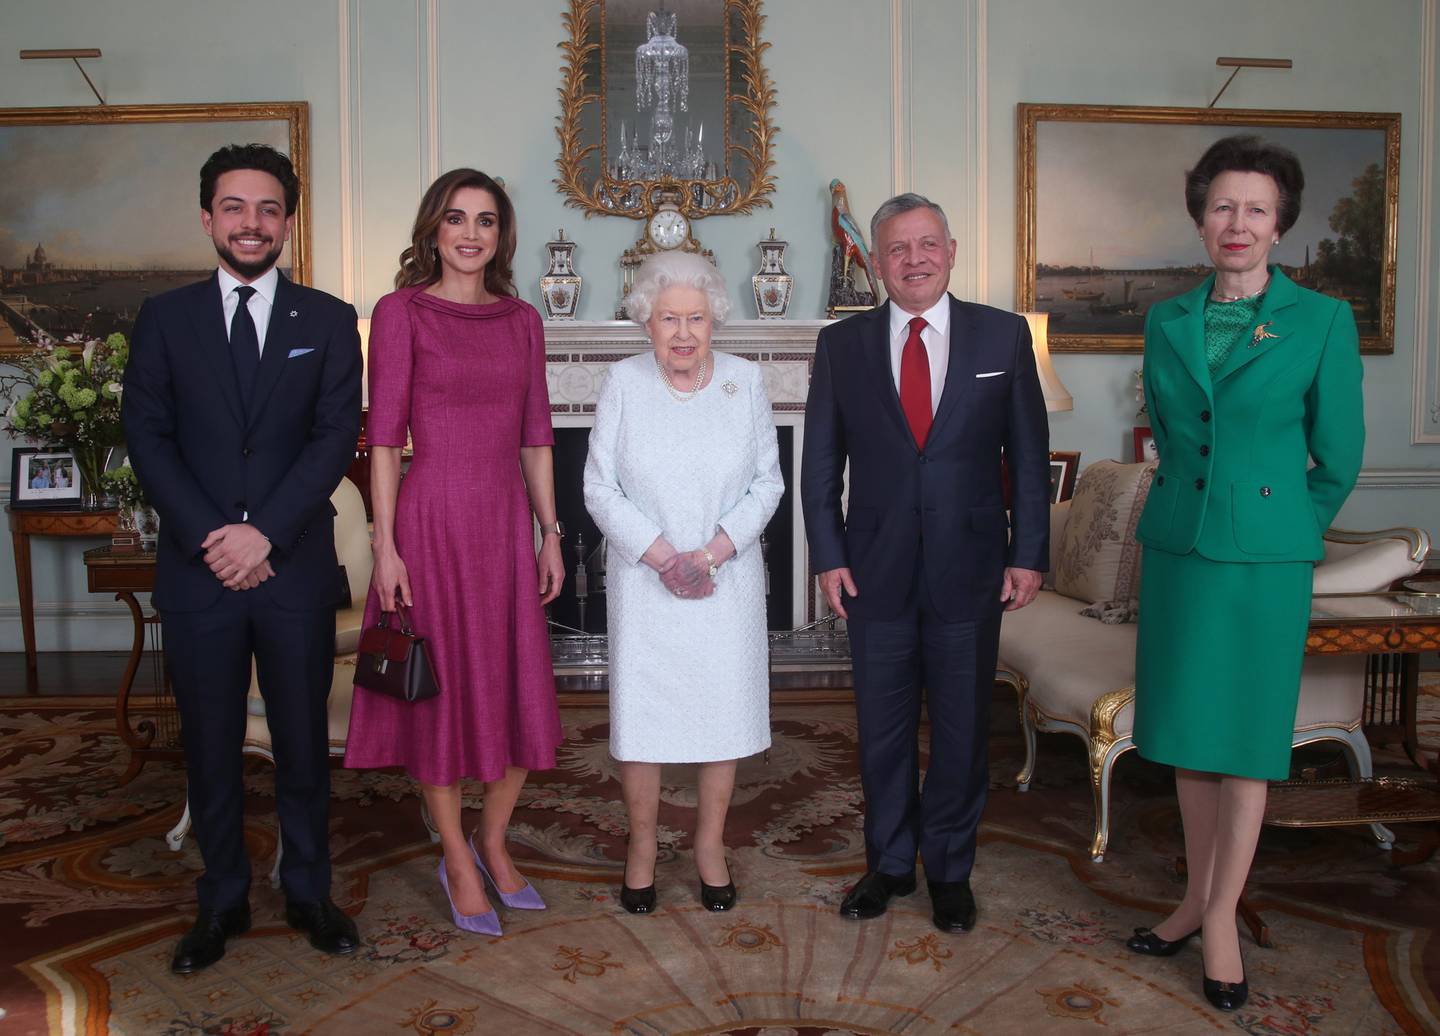 Queen Elizabeth II with, from left, Crown Prince Hussein of Jordan, Queen Rania of Jordan, King Abdullah II of Jordan and Princess Anne, Princess Royal, during a private audience at Buckingham Palace in February 2019. Getty Images